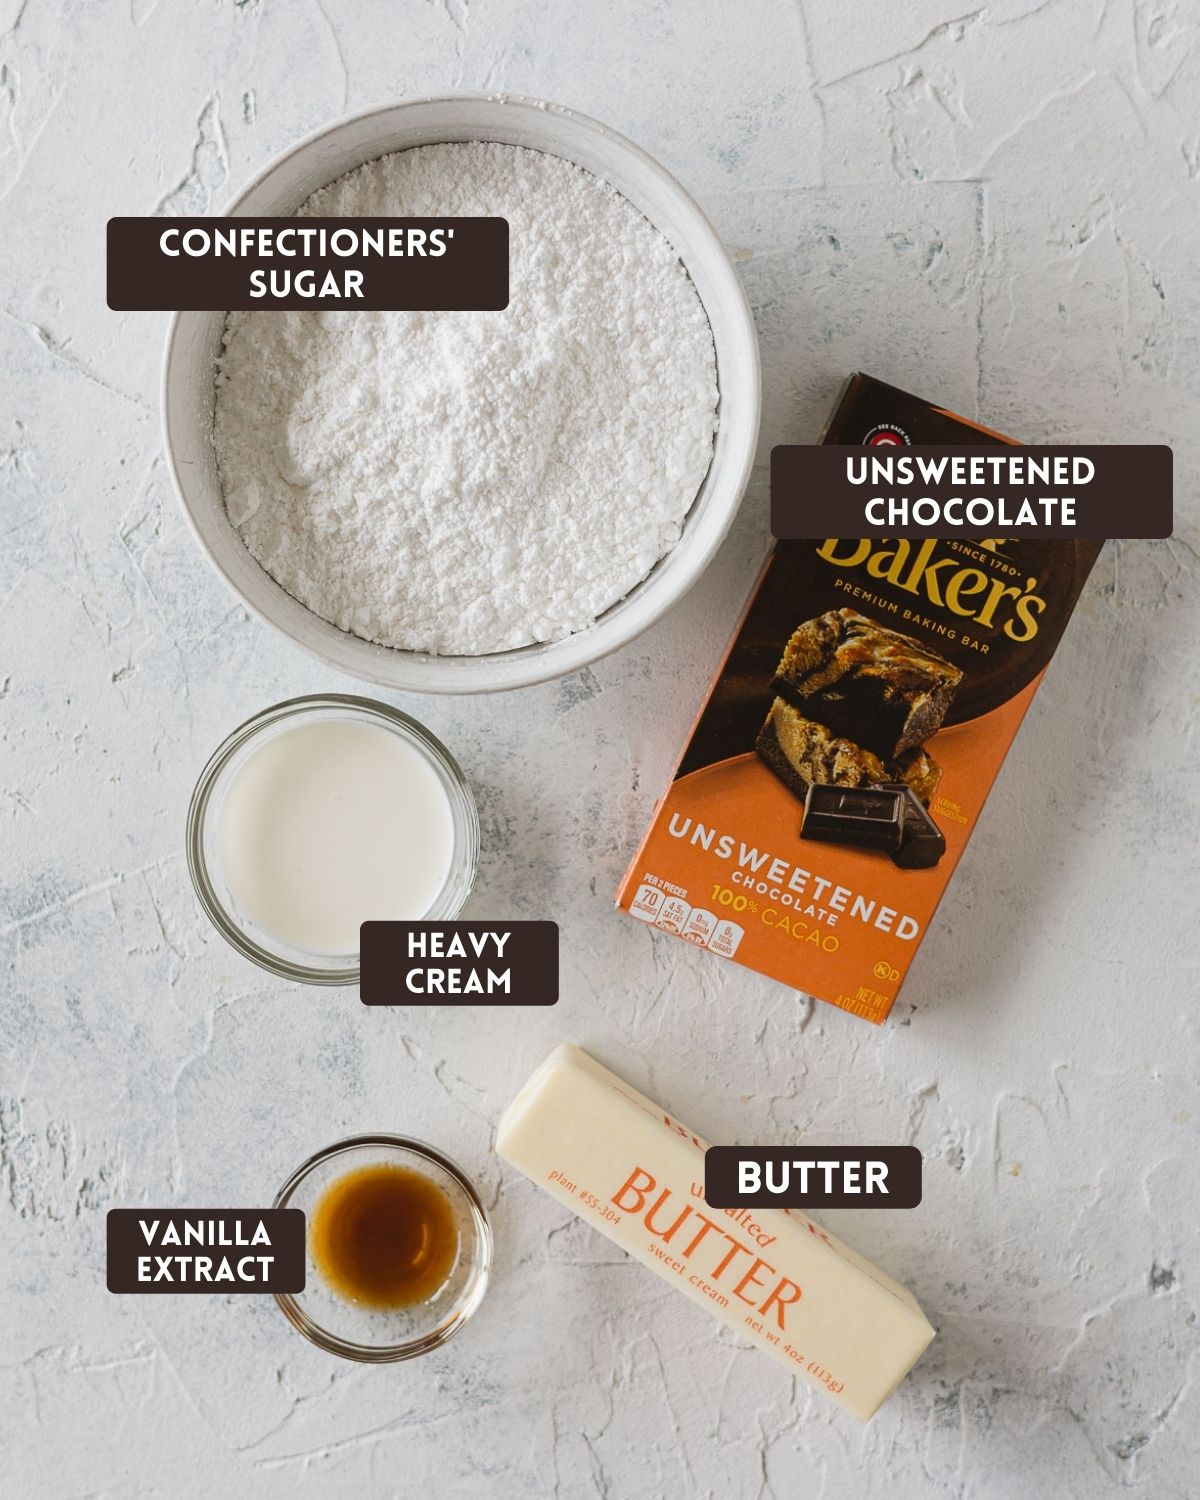 Labeled ingredients for chocolate buttercream: sugar, unsweetened chocolate, heavy cream, vanilla extract, and unsalted butter.